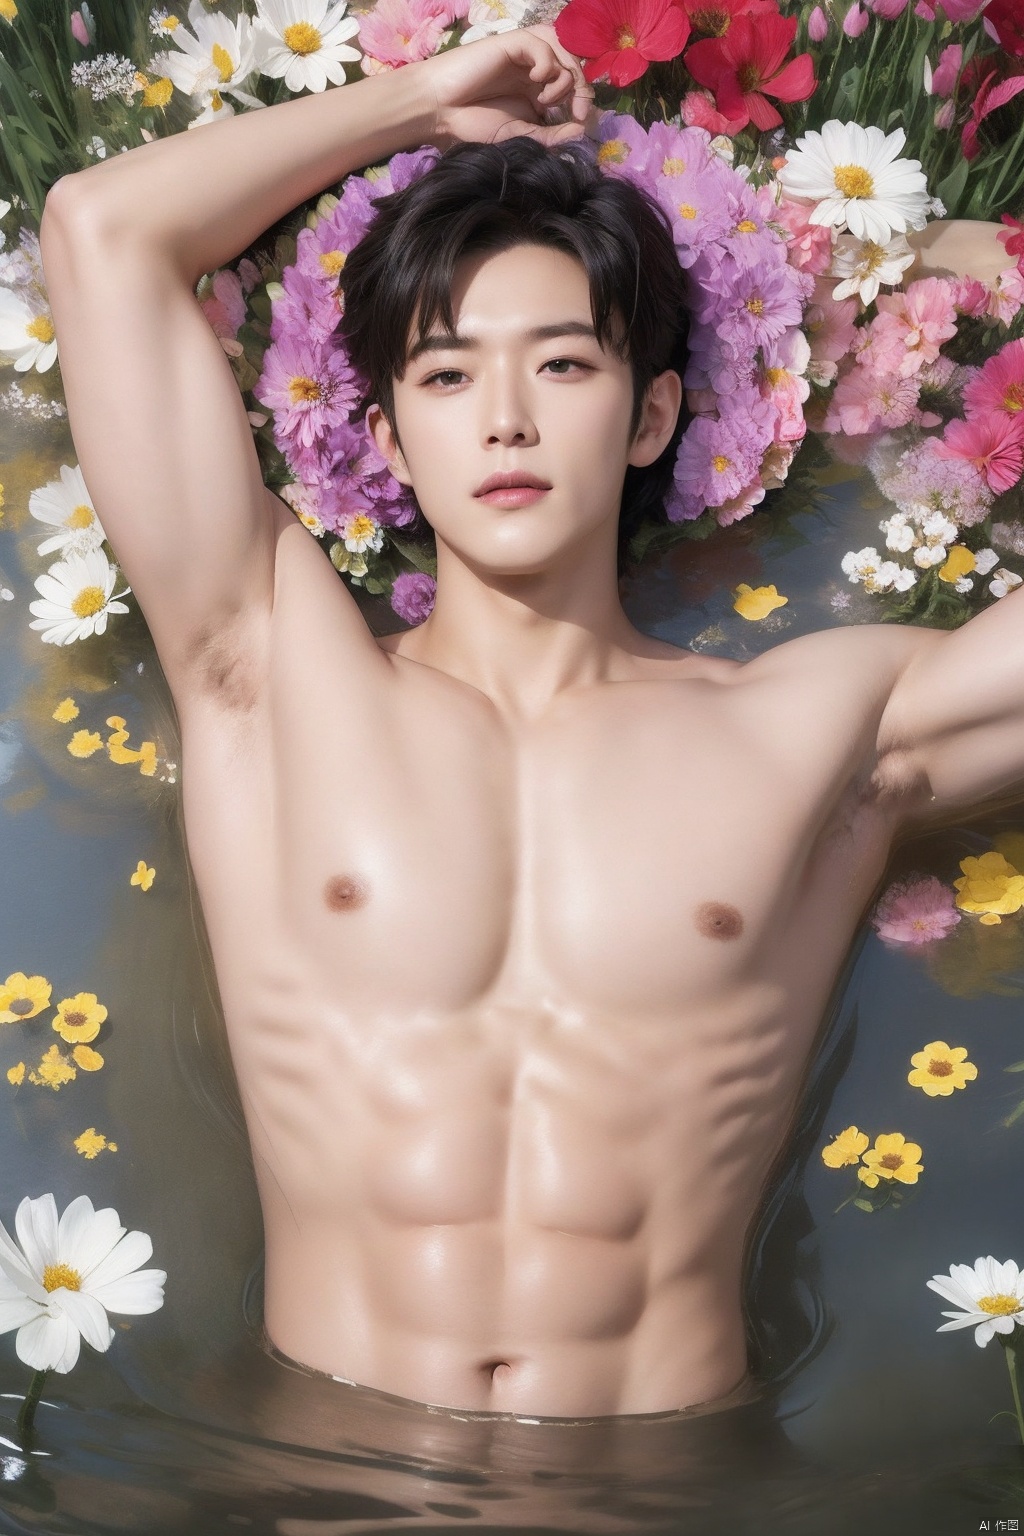  handsome male,pov, ((( lying in flowers))), hundreds of flowers,Flowers covered,Flowers flooded the handsome guy,男